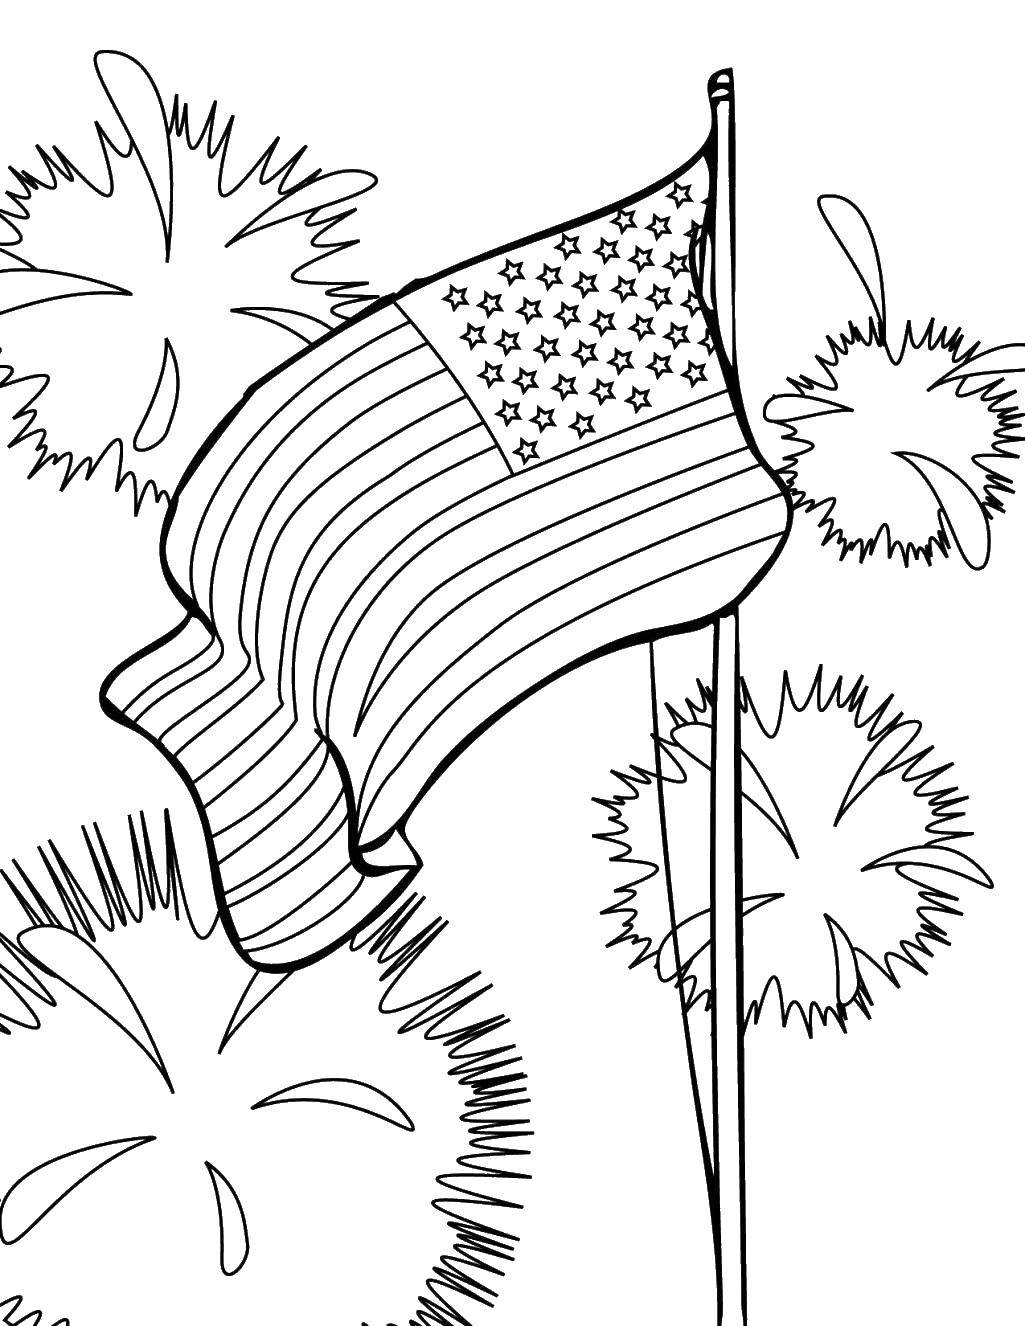 Coloring Us flag, fireworks. Category USA . Tags:  USA, celebration, 4th of July, flag.